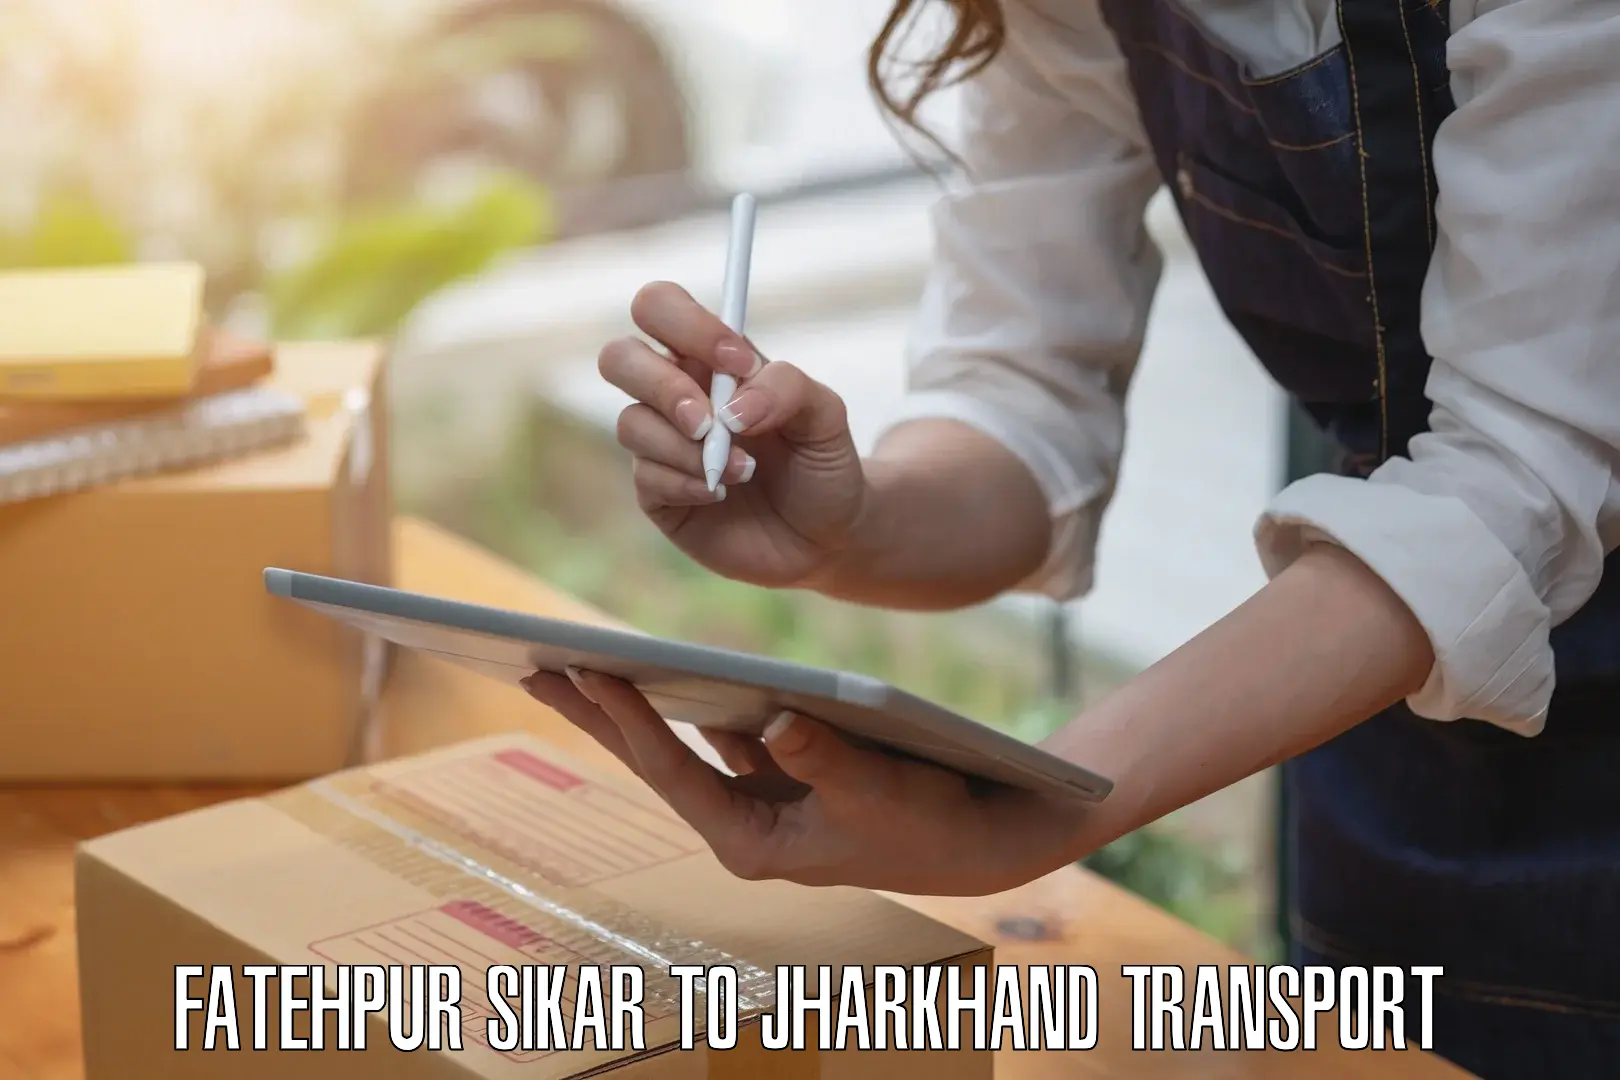 Express transport services Fatehpur Sikar to Jharkhand